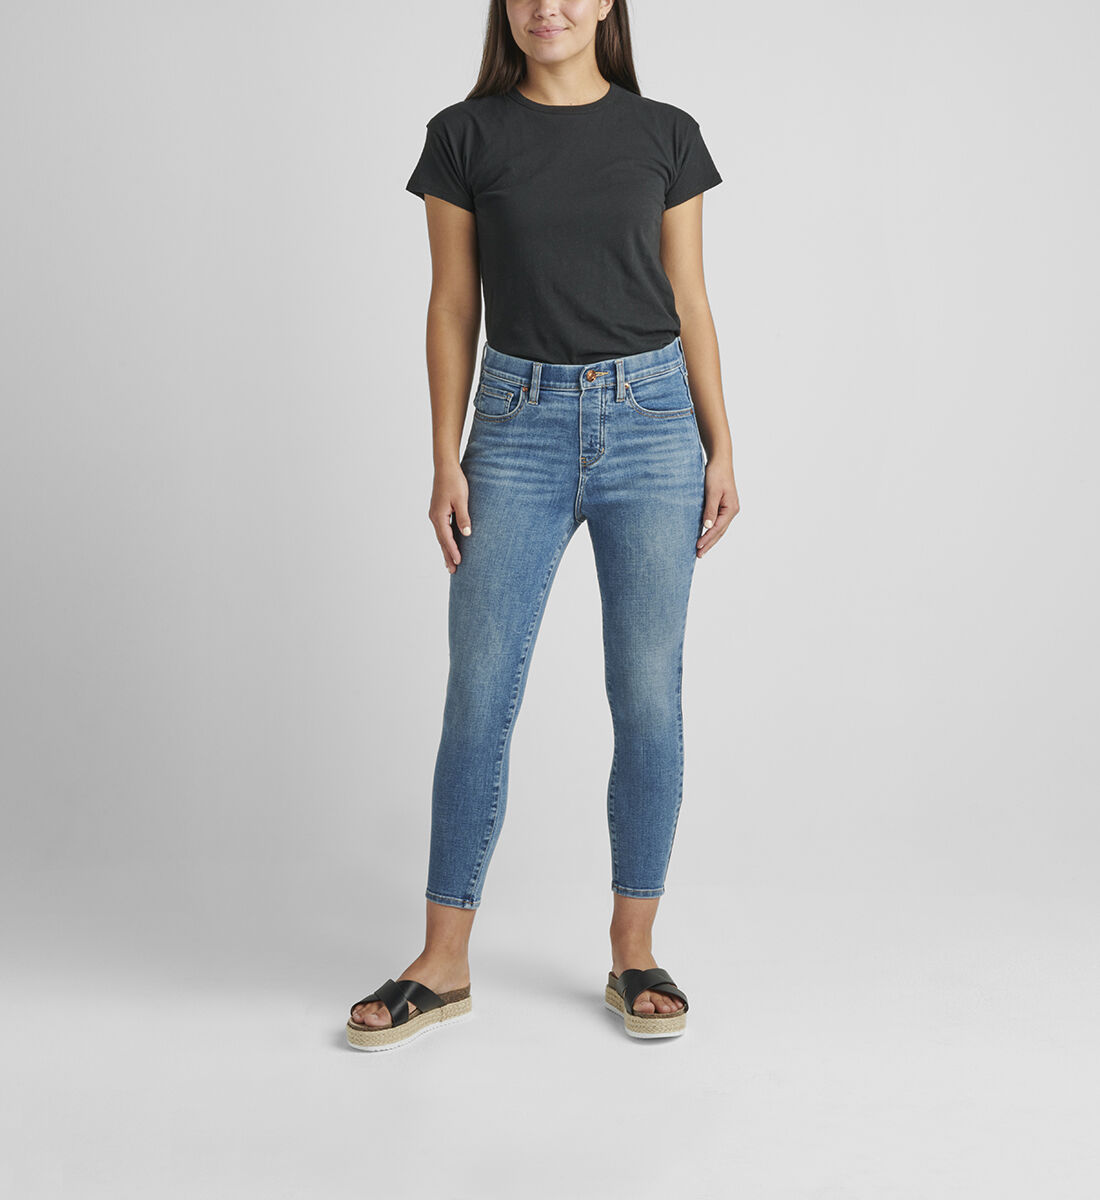 Valentina High Rise Skinny Crop Pull-On Jeans Petite Front